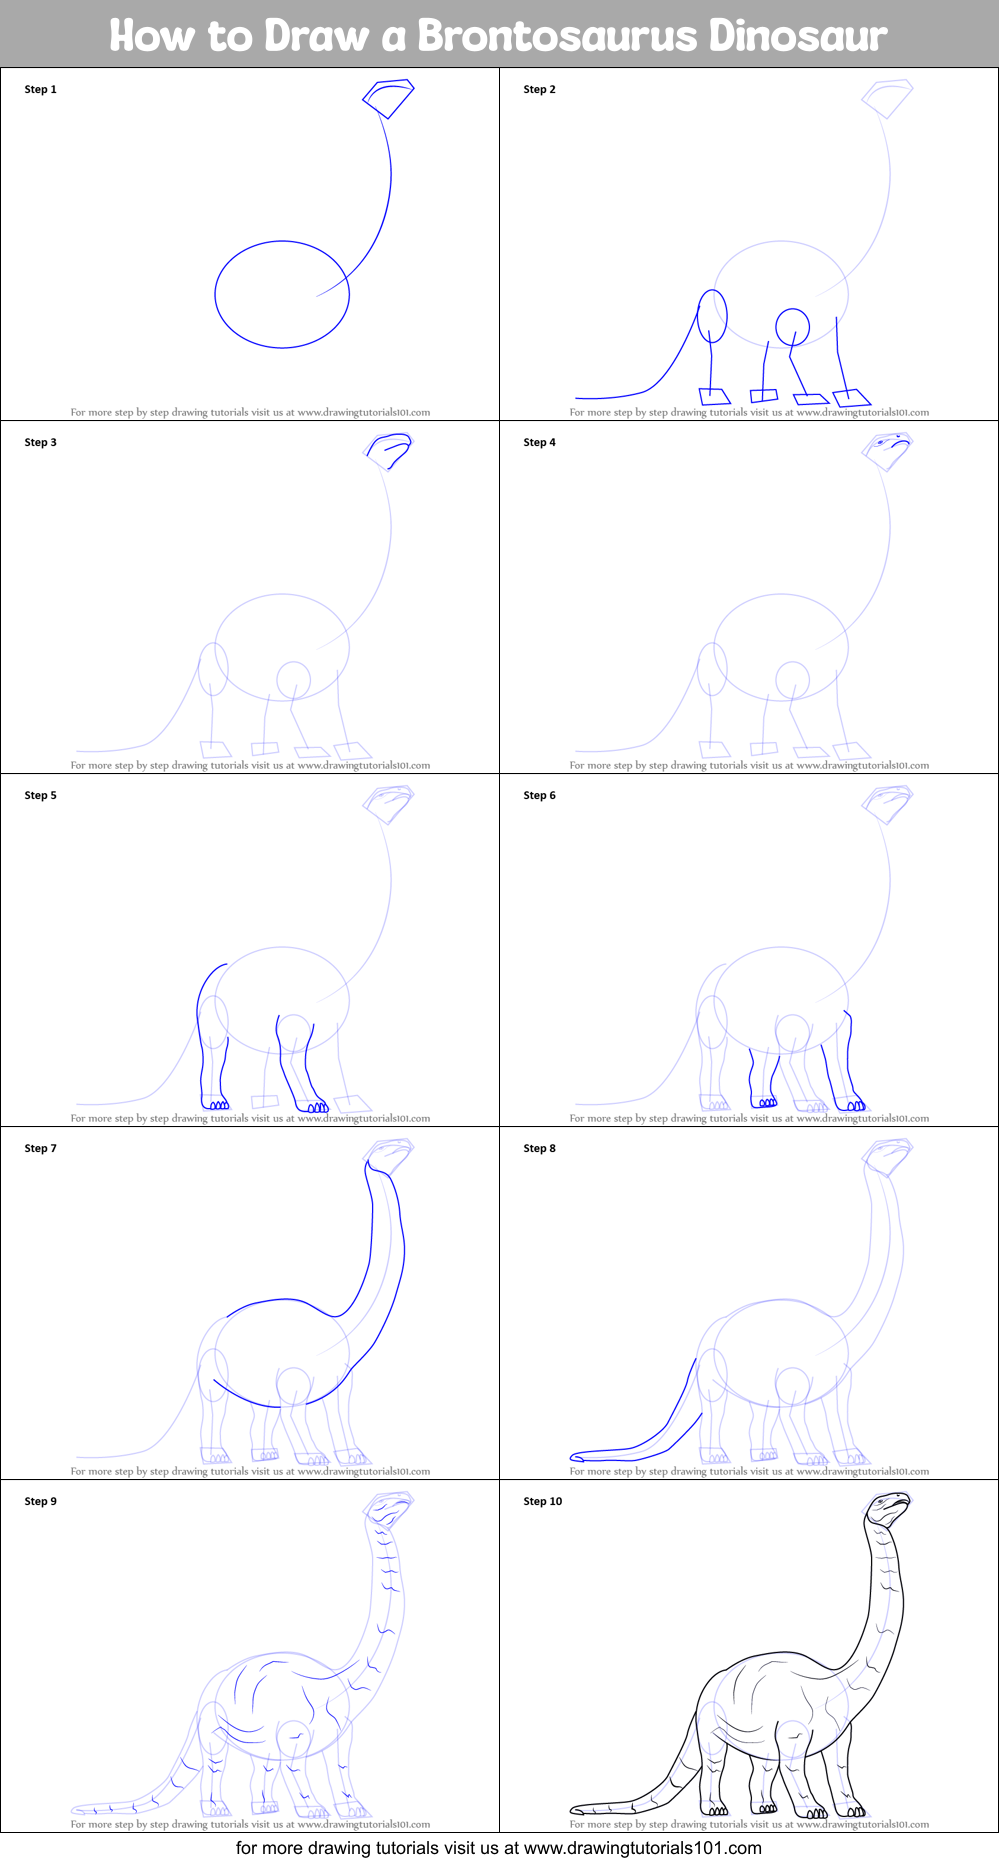 How to Draw a Brontosaurus Dinosaur printable step by step drawing